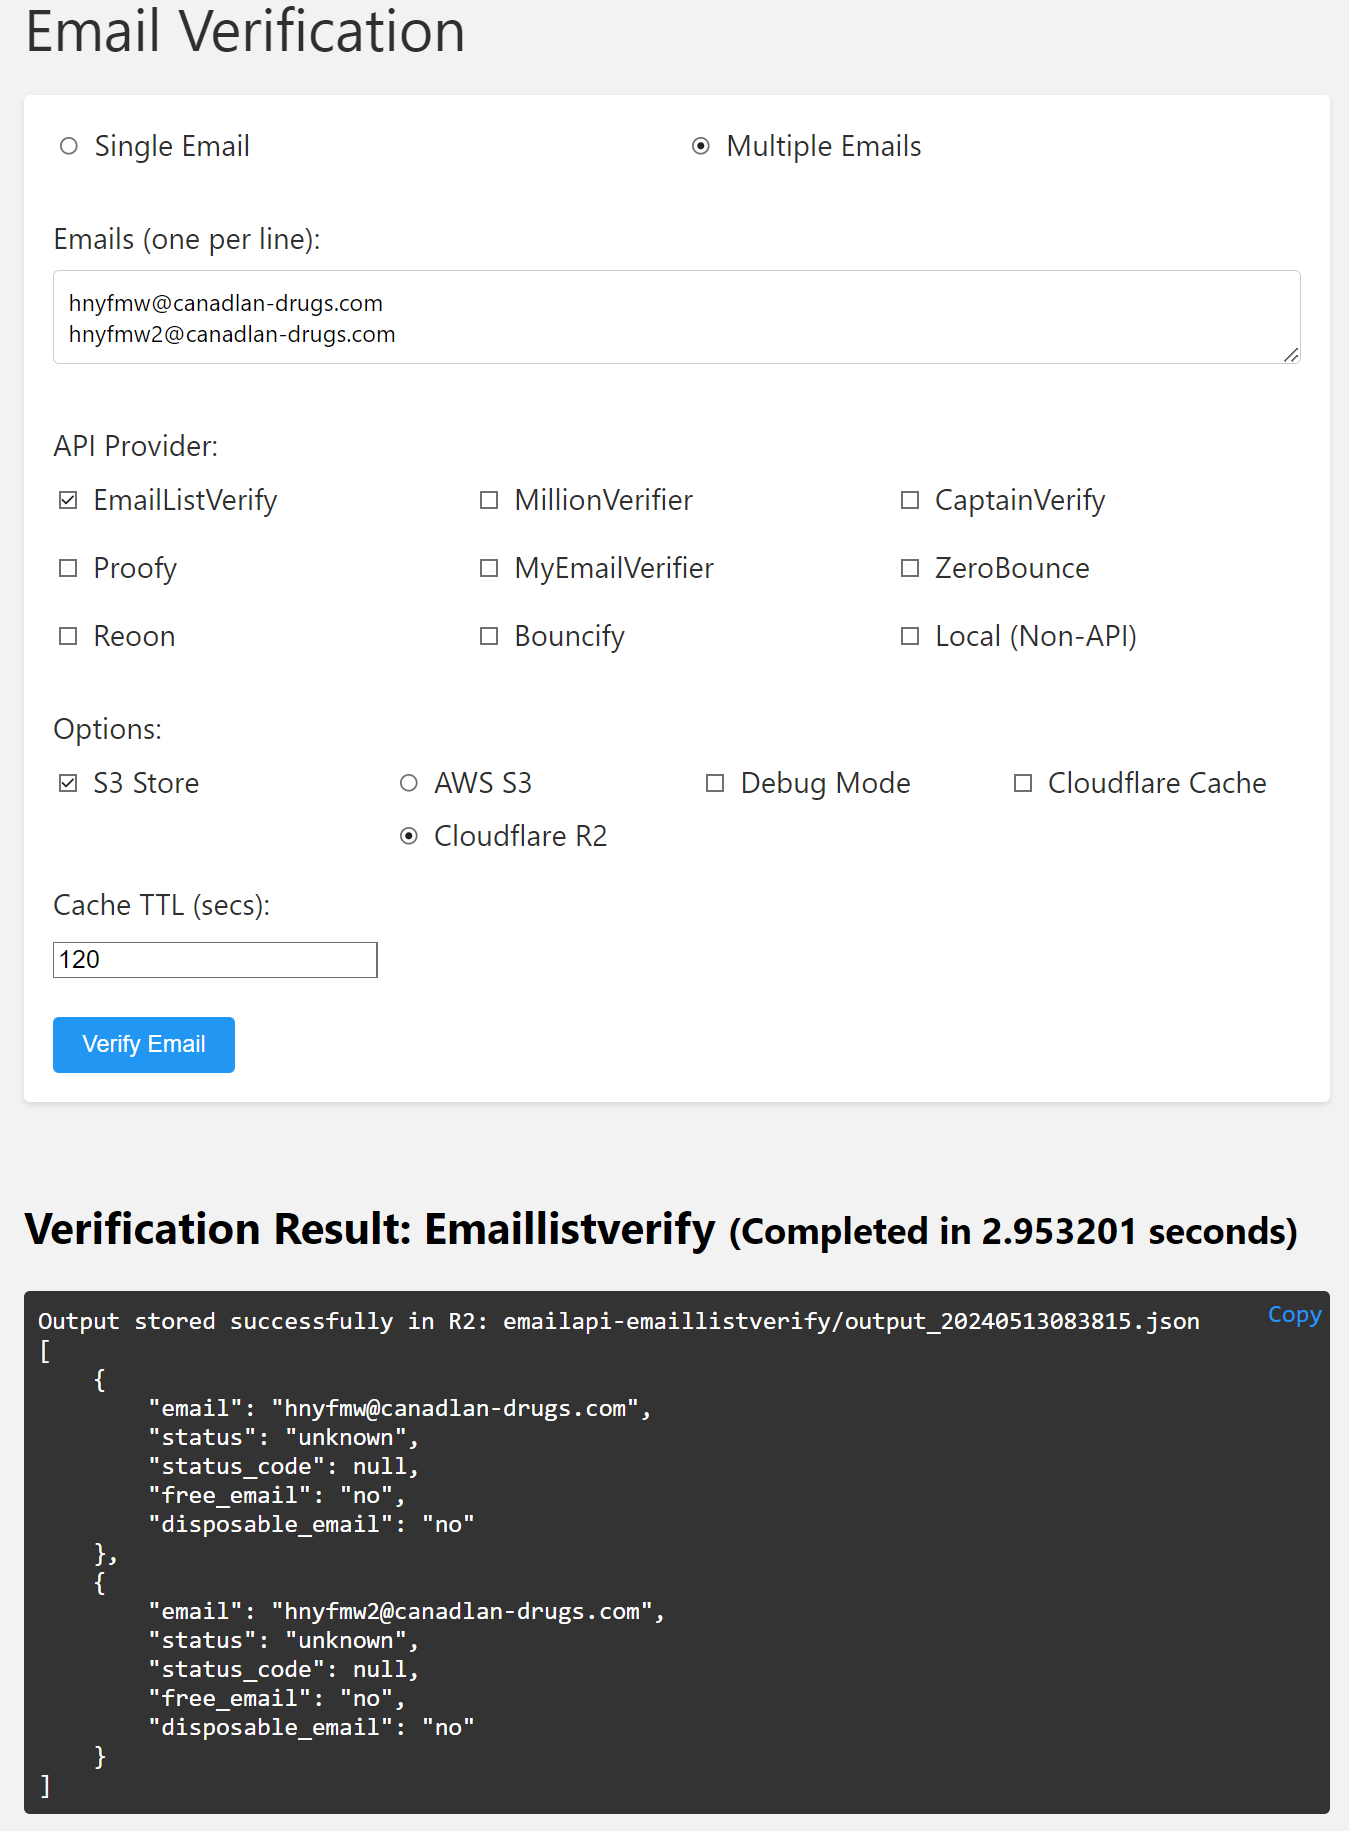 Email verification PHP Wrapper script with Cloudflare Cache & S3 storage support